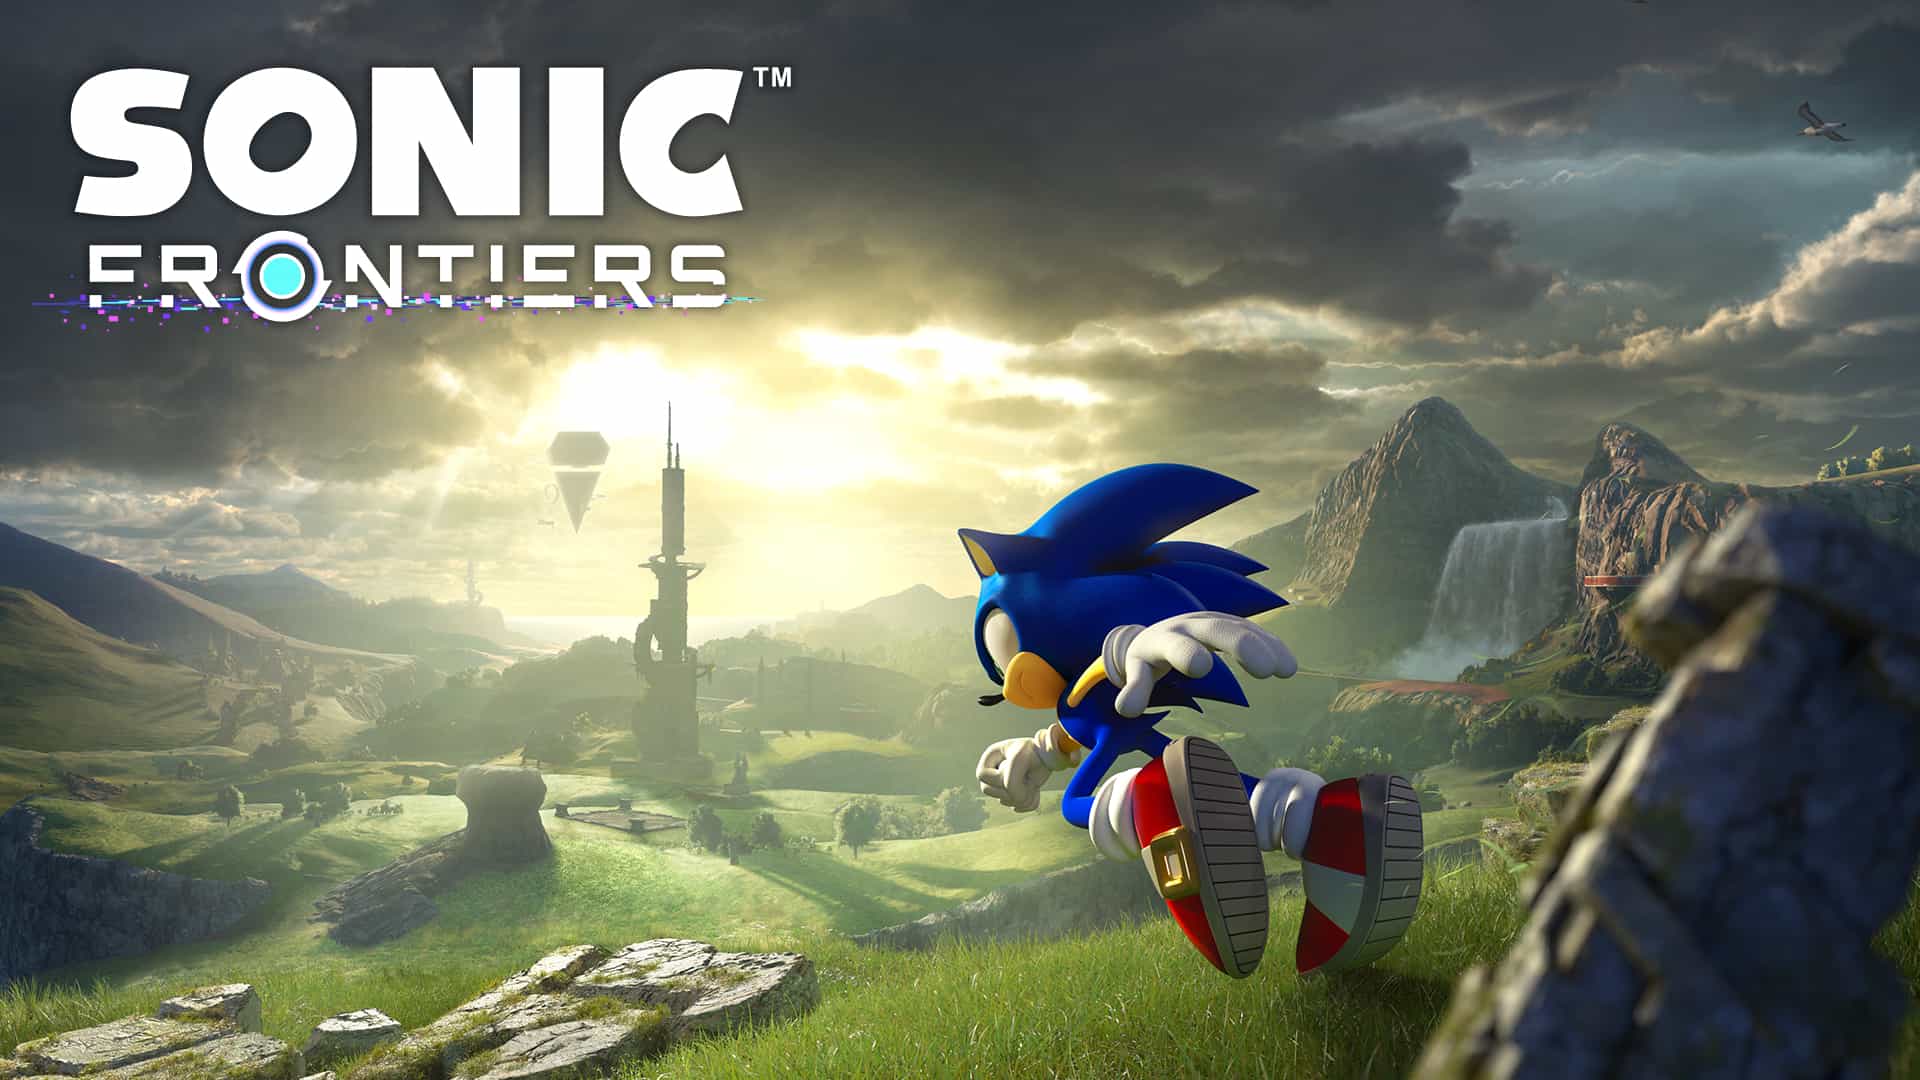 Sonic Frontiers DLCs Be Like, Sonic Frontiers